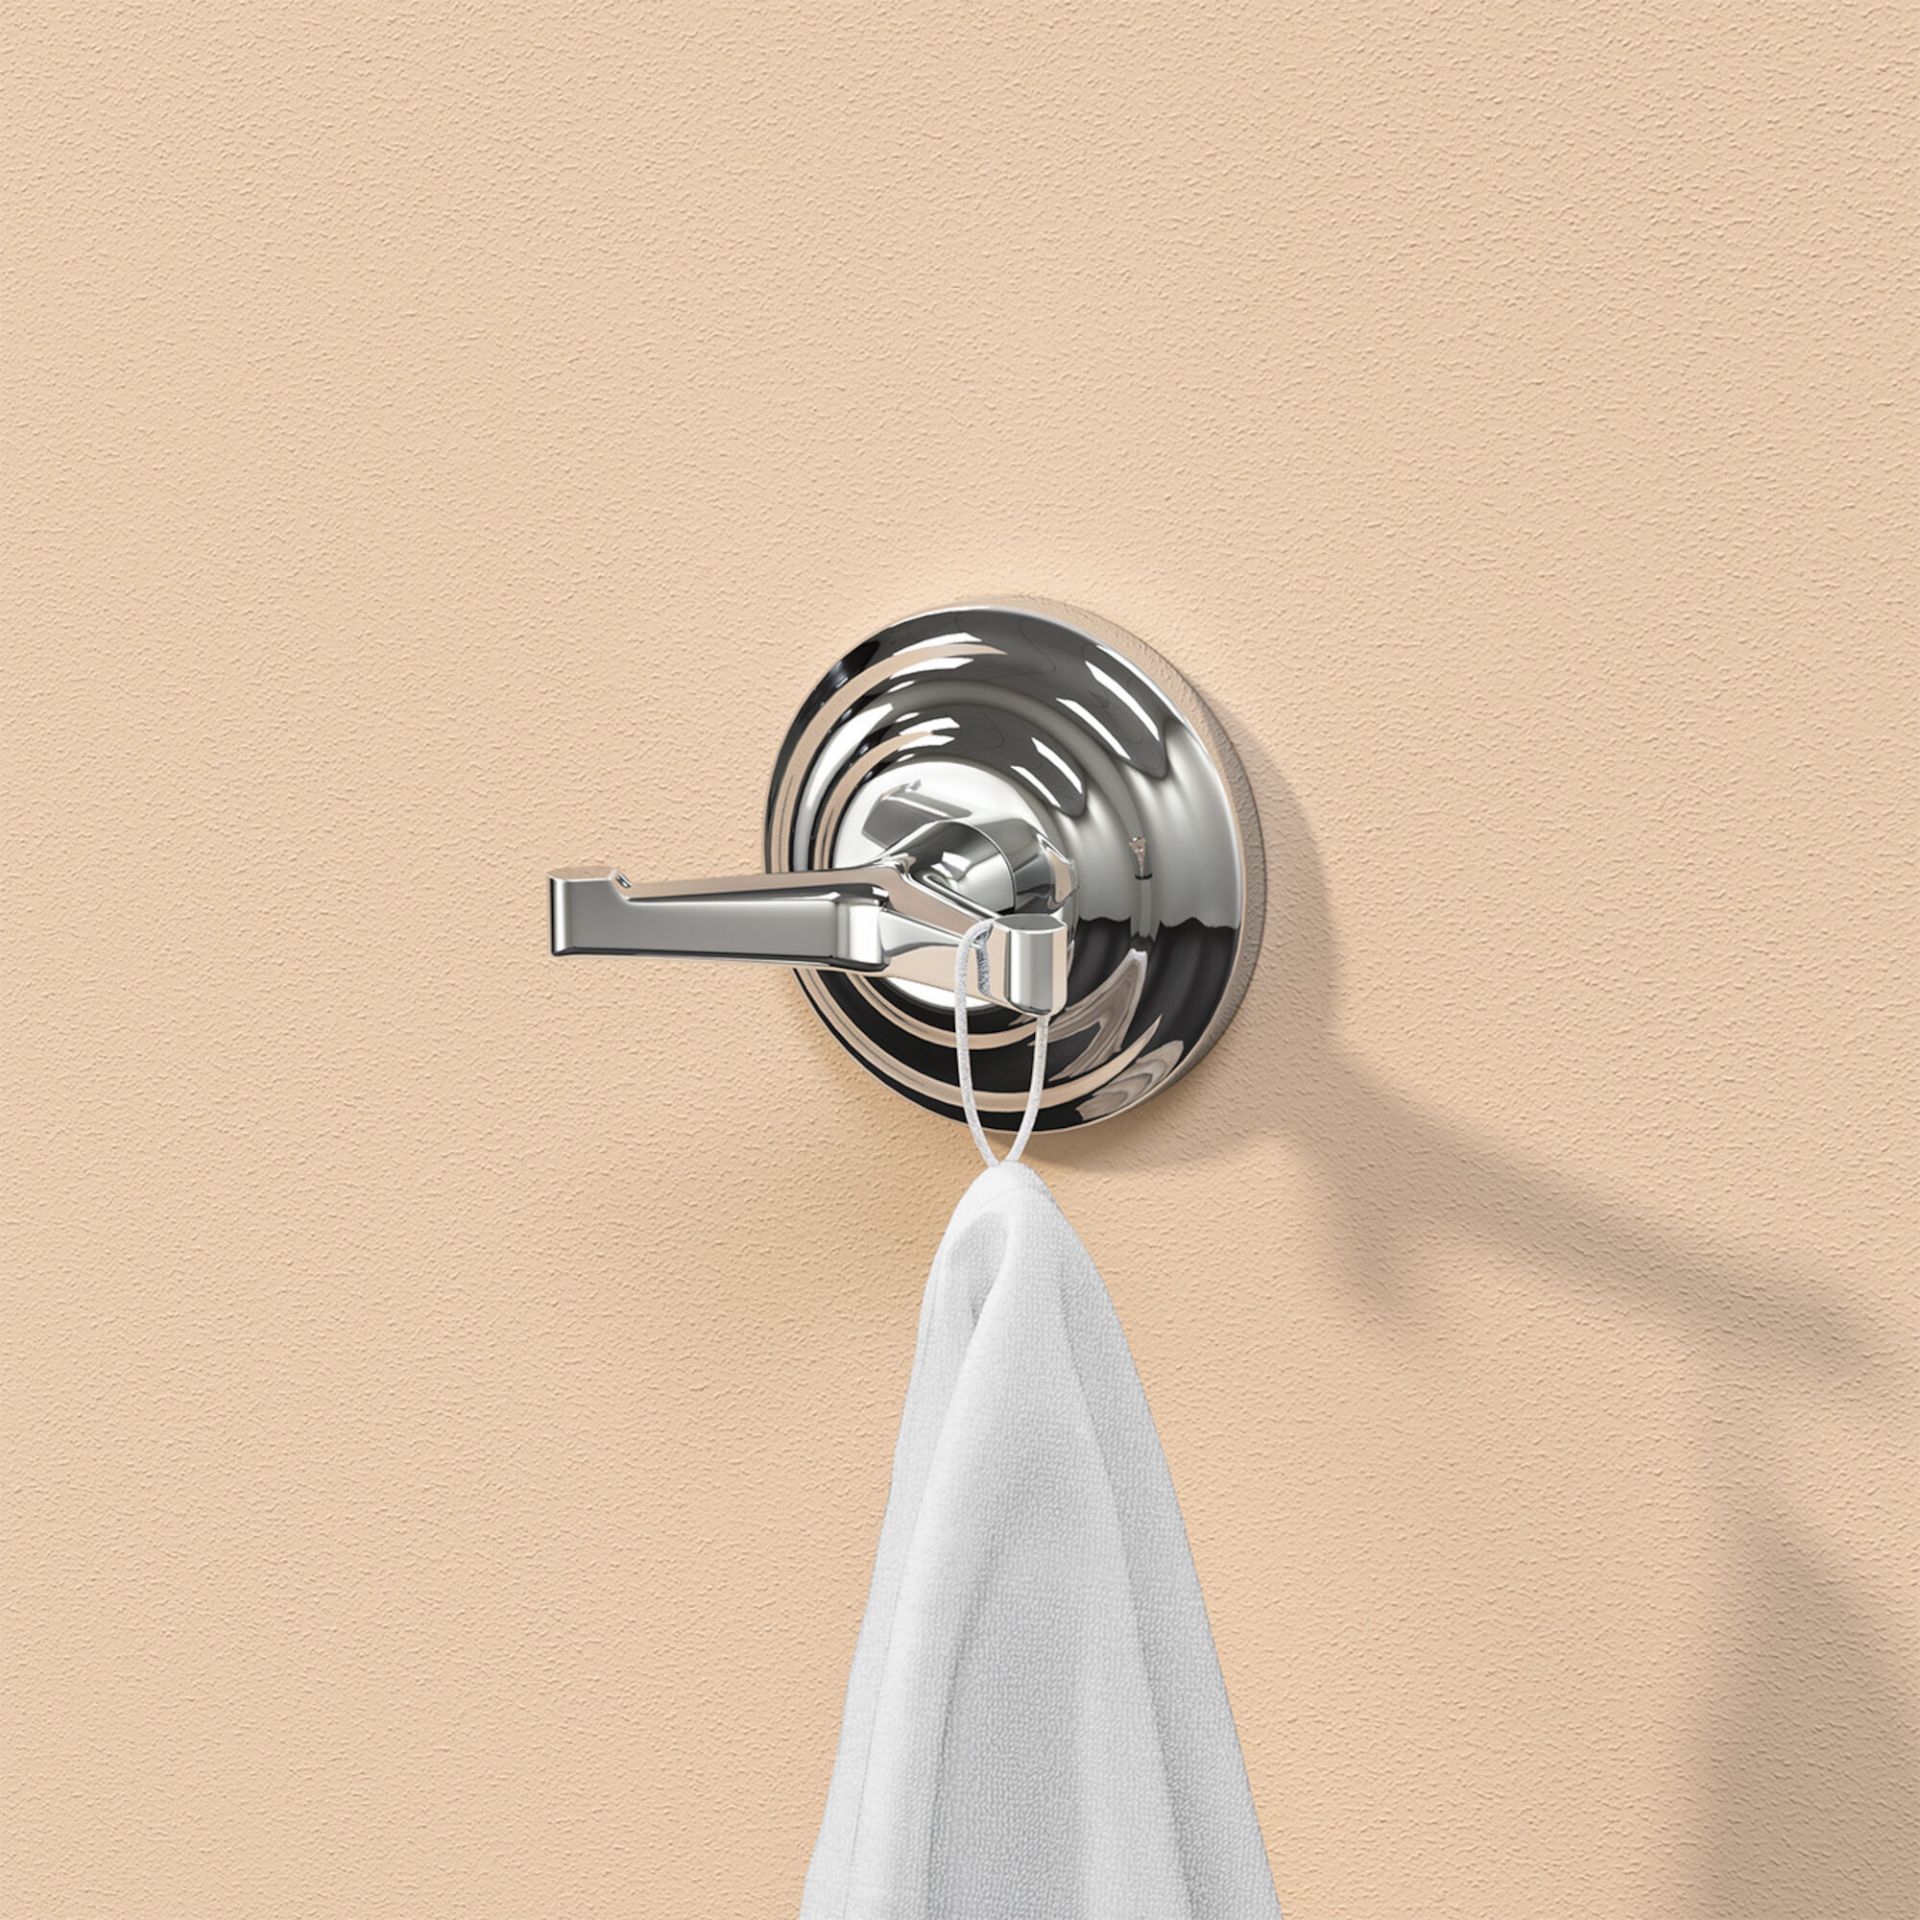 (W30) York Robe Hook Finishes your bathroom with a little extra functionality and style Made with